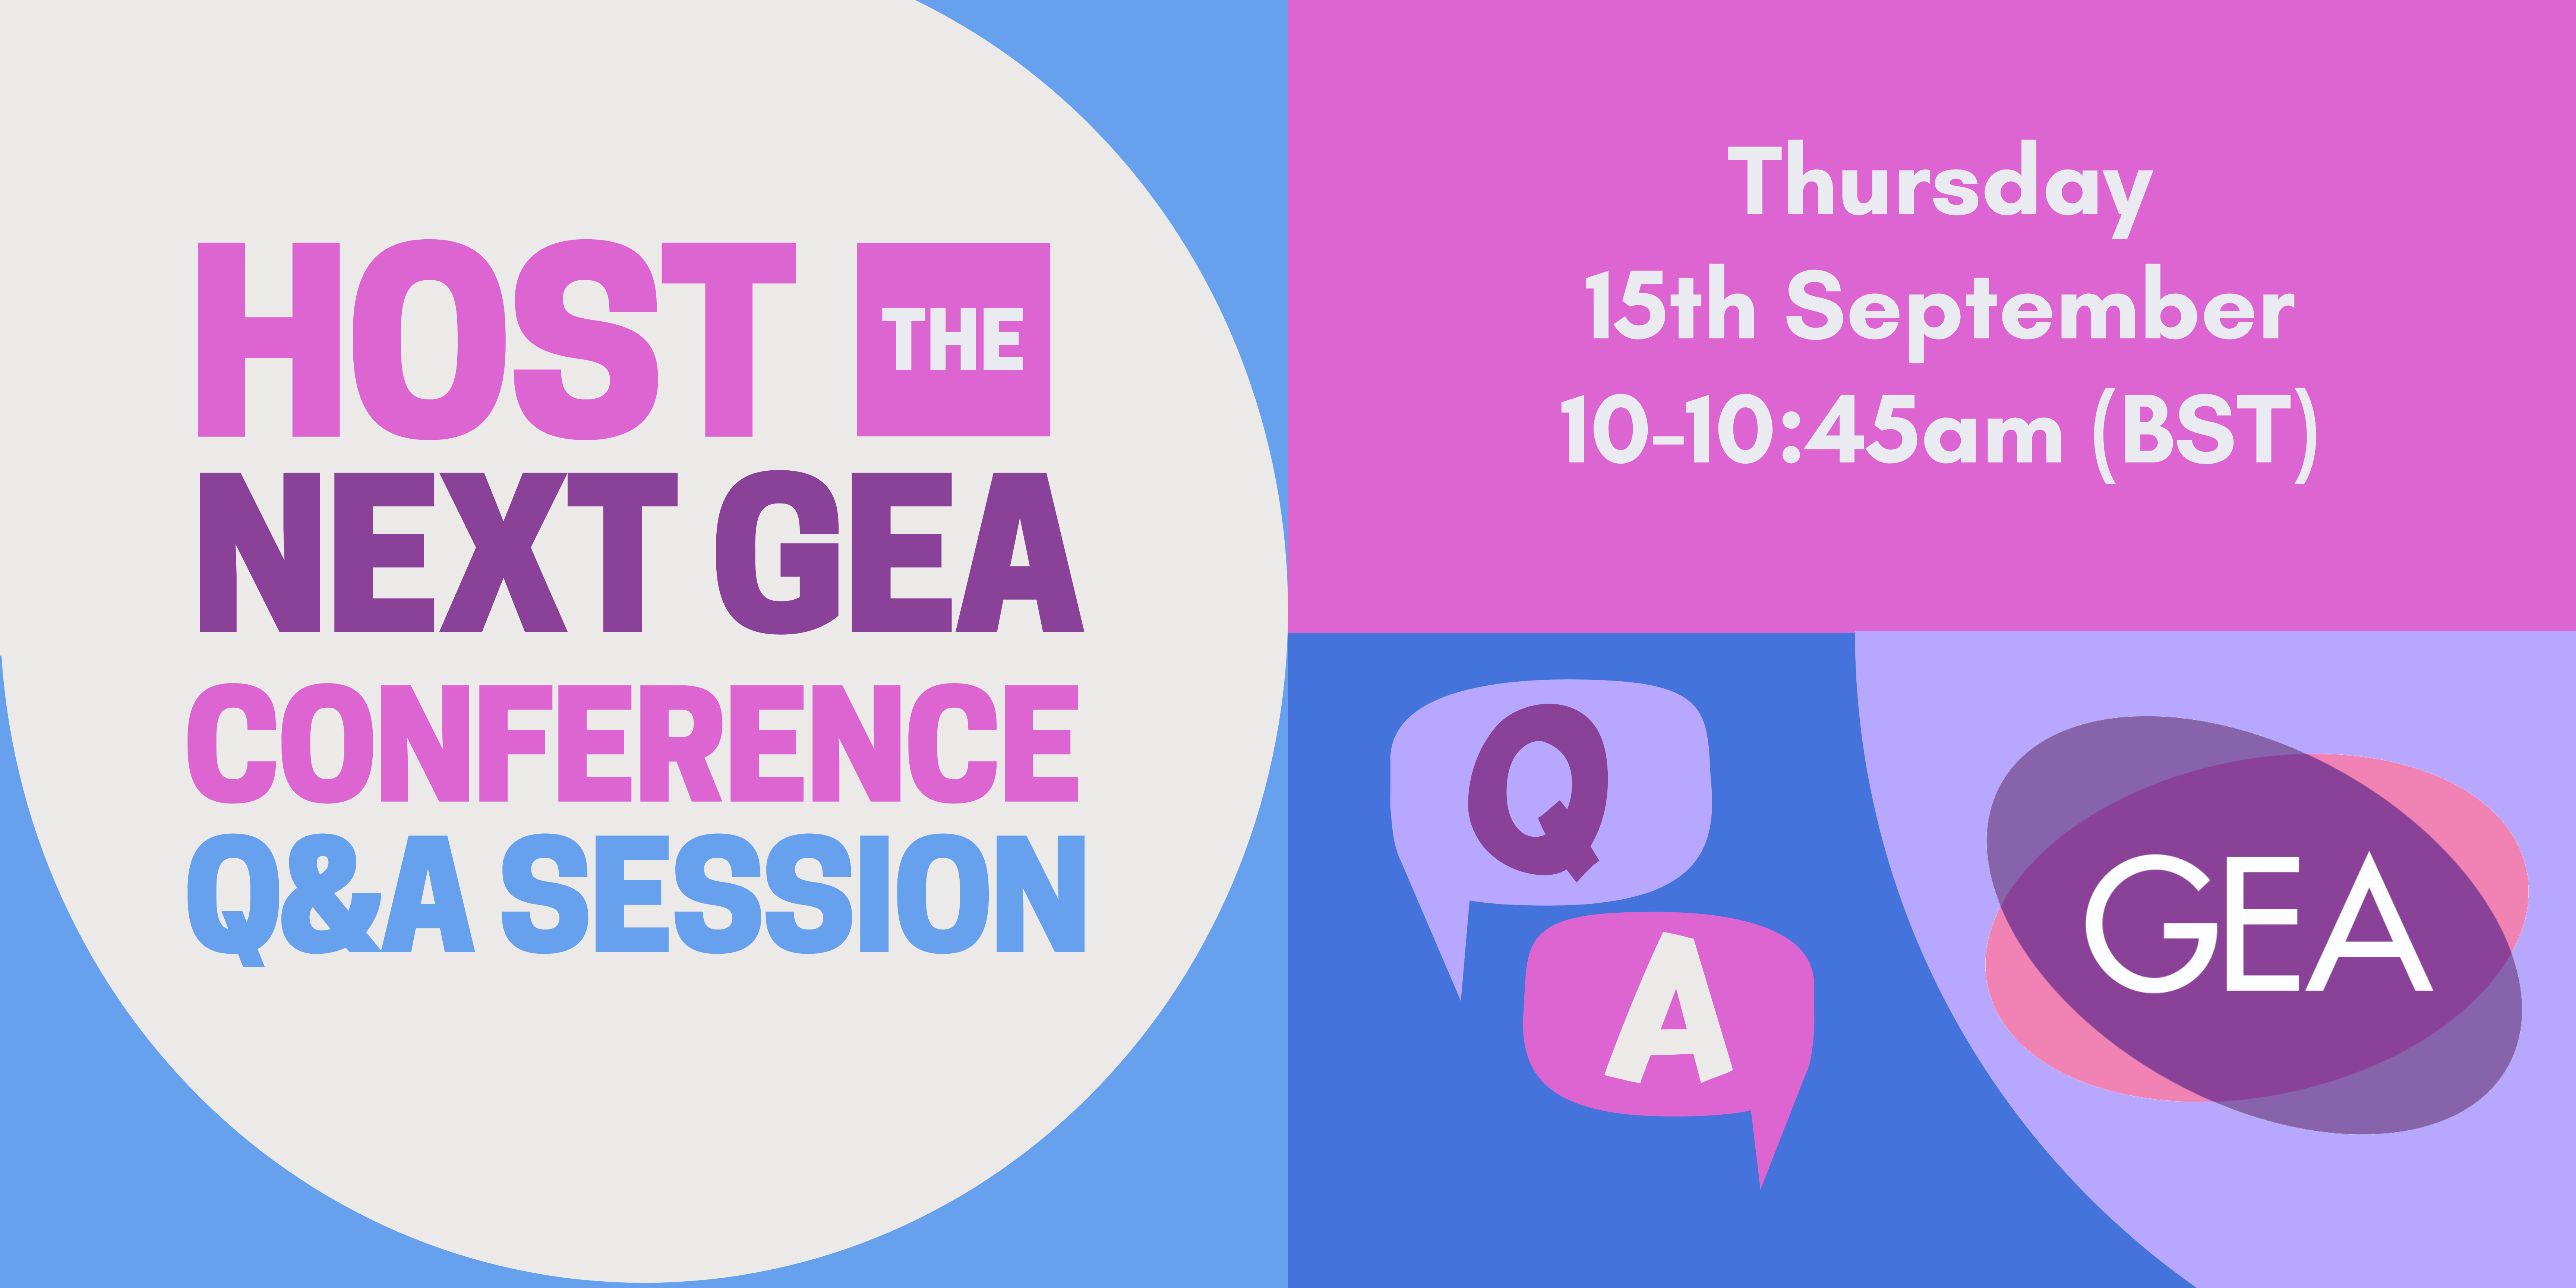 This banner image is shades of pink, purple, blue, and light grey and includes the words: Host the next GEA Conference Q&A Session, Thursday 15 September 10-10:45am (BST). The image includes the Gender and Education Association (GEA) logo and two speech bubbles with Q and A in them.